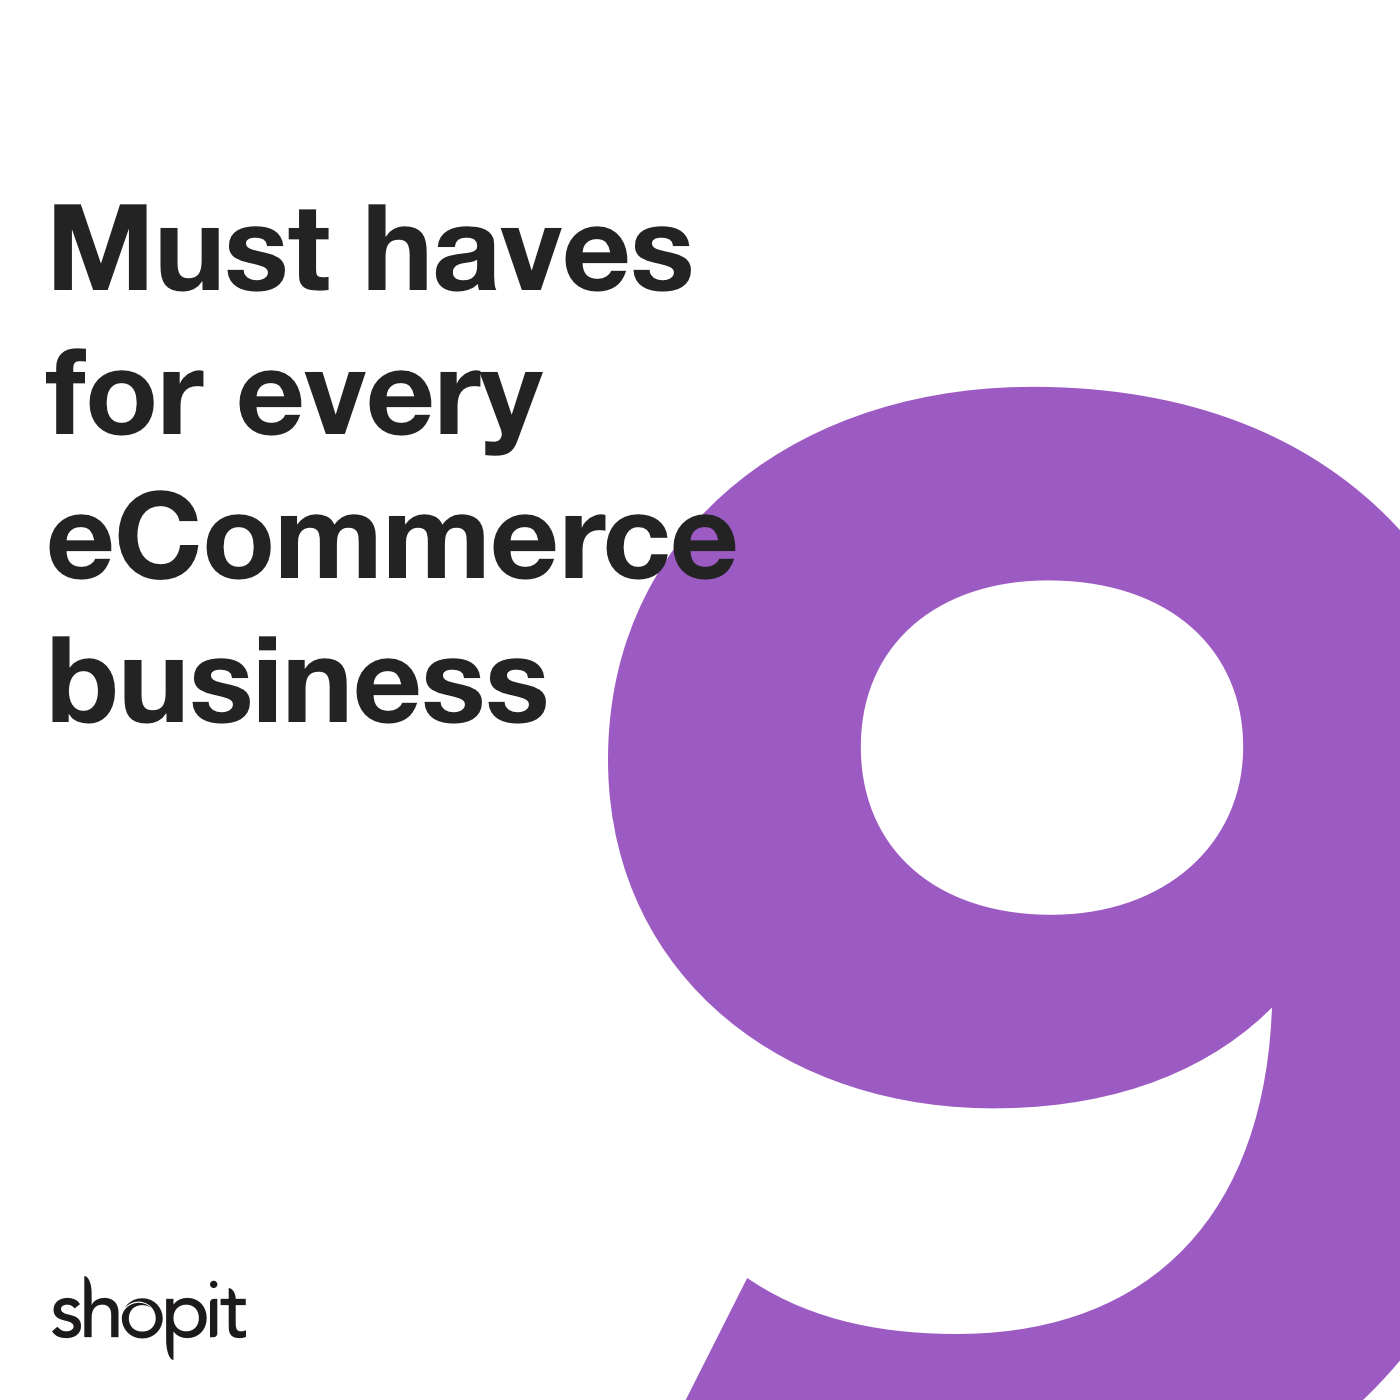 9 things every eCommerce business needs